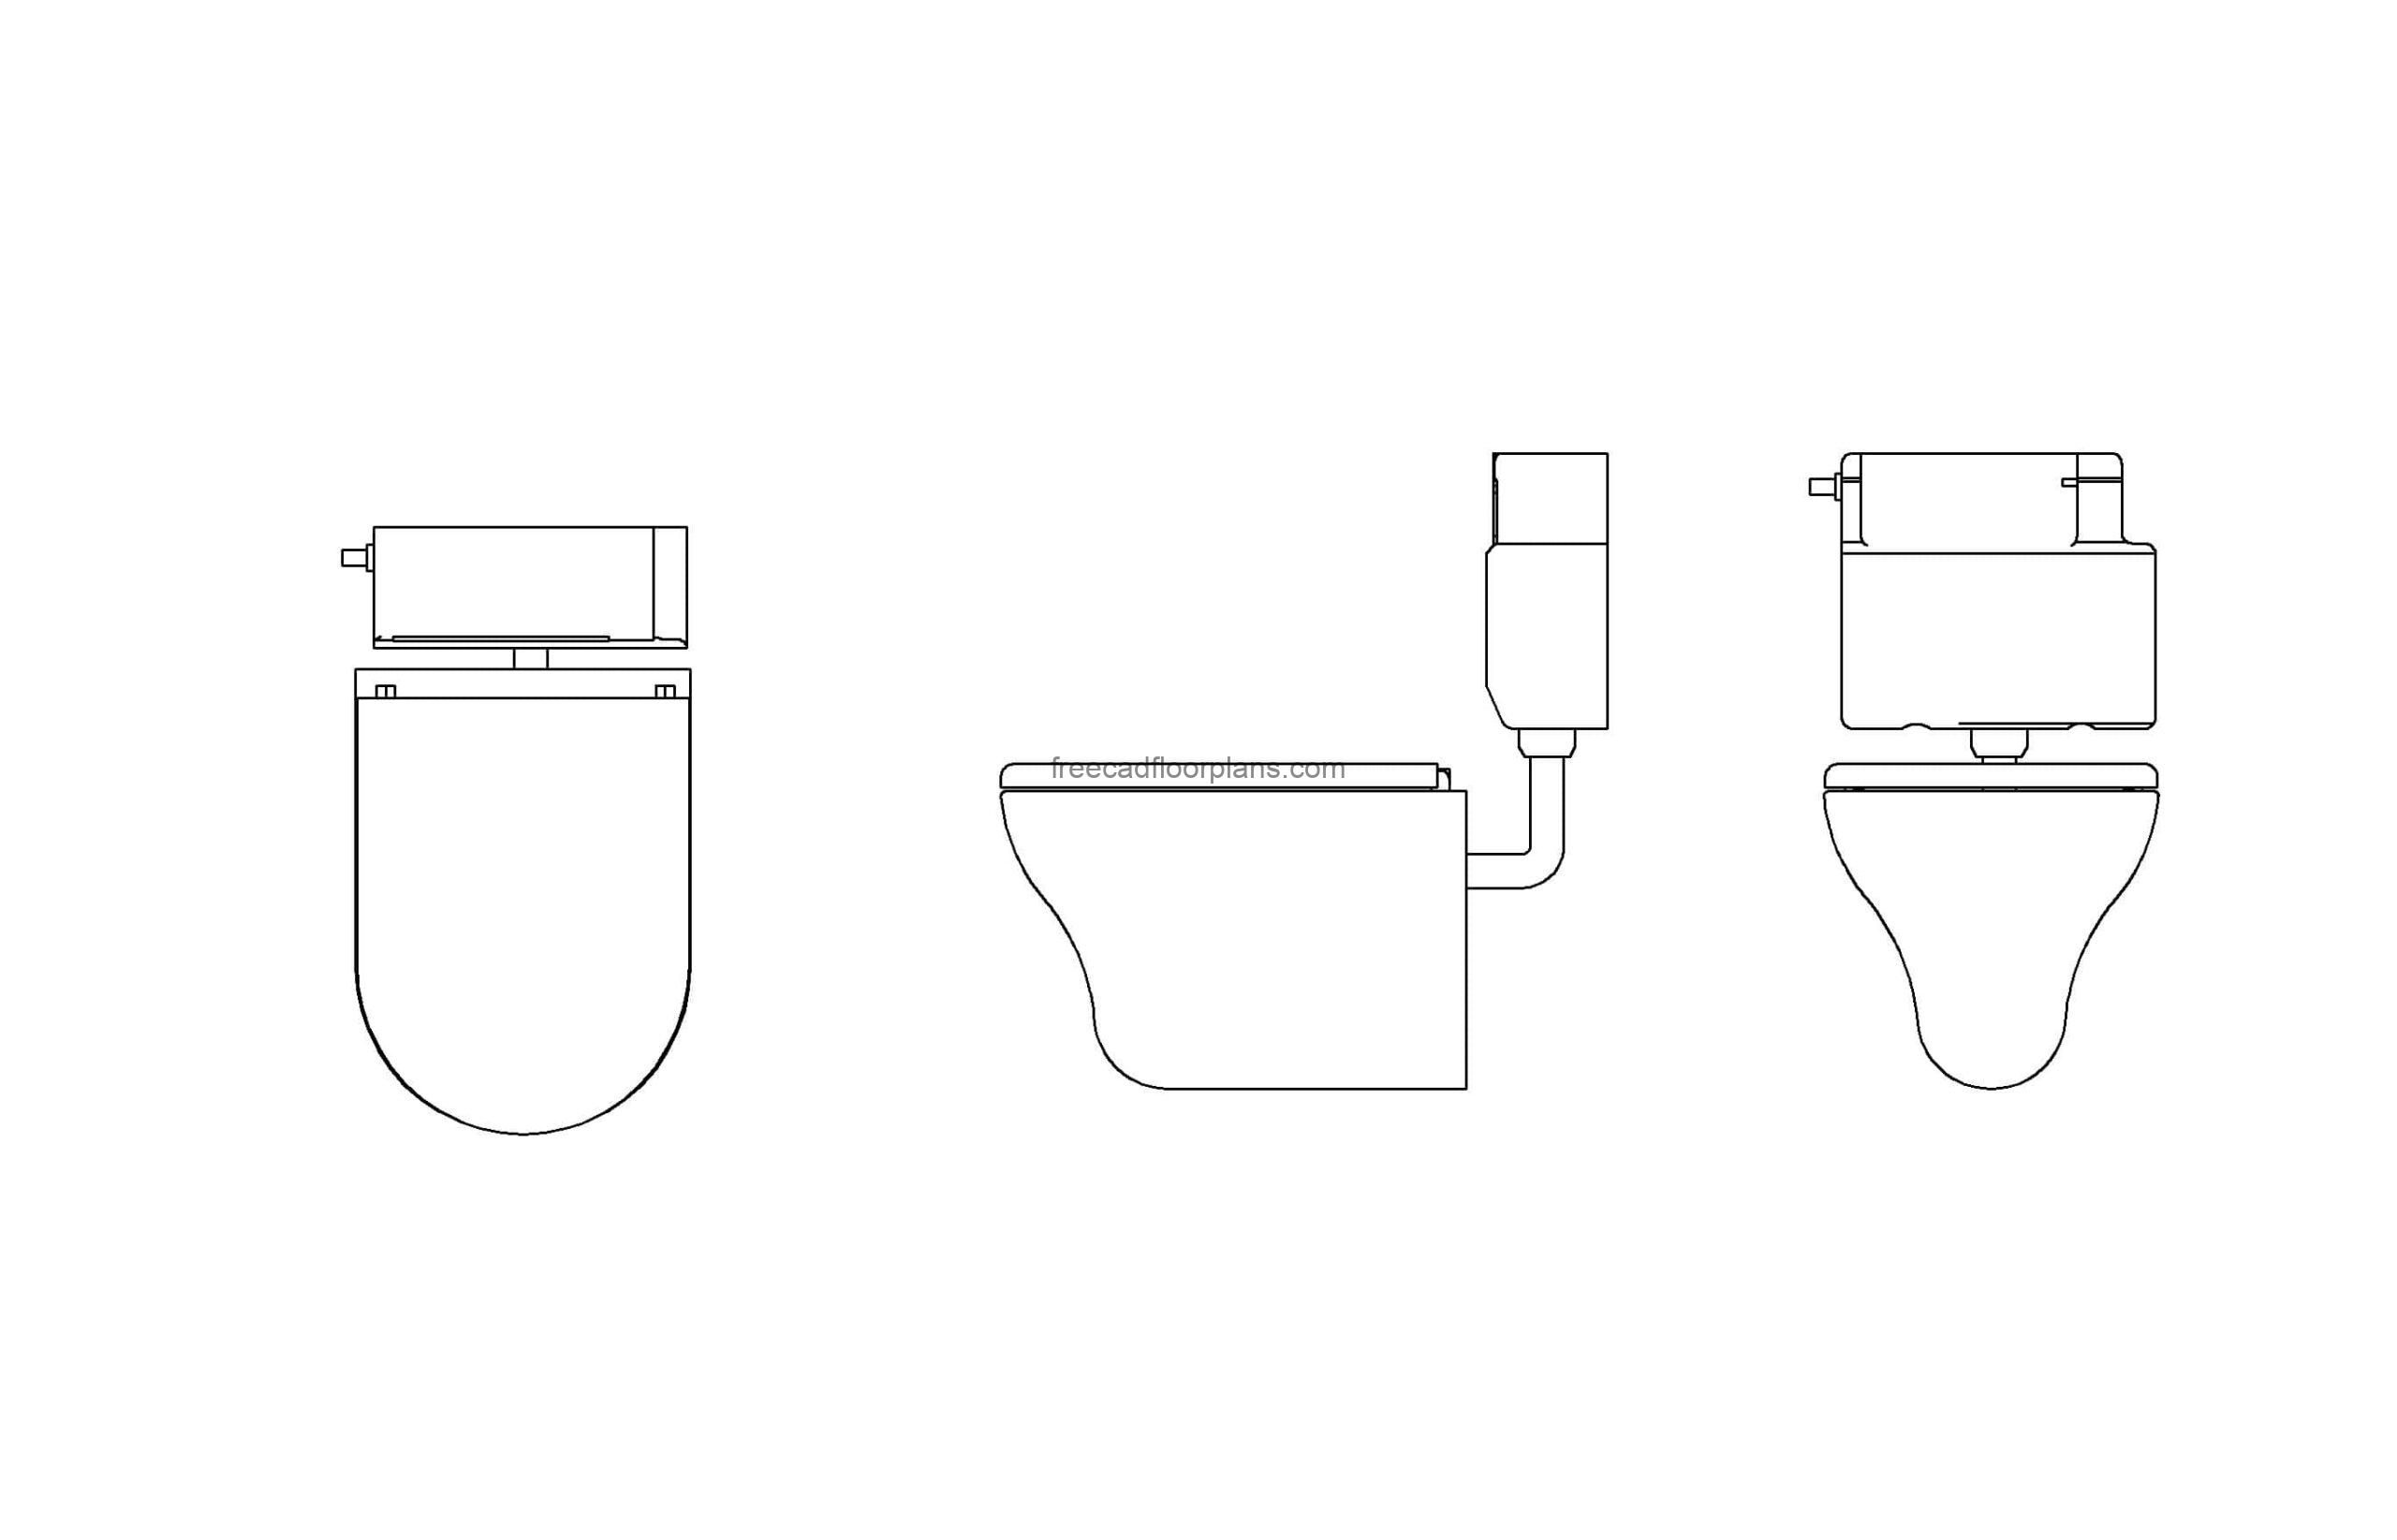 autocad drawing of a concealed cistern, all 2d views, plan and elevation, dwg file for free download